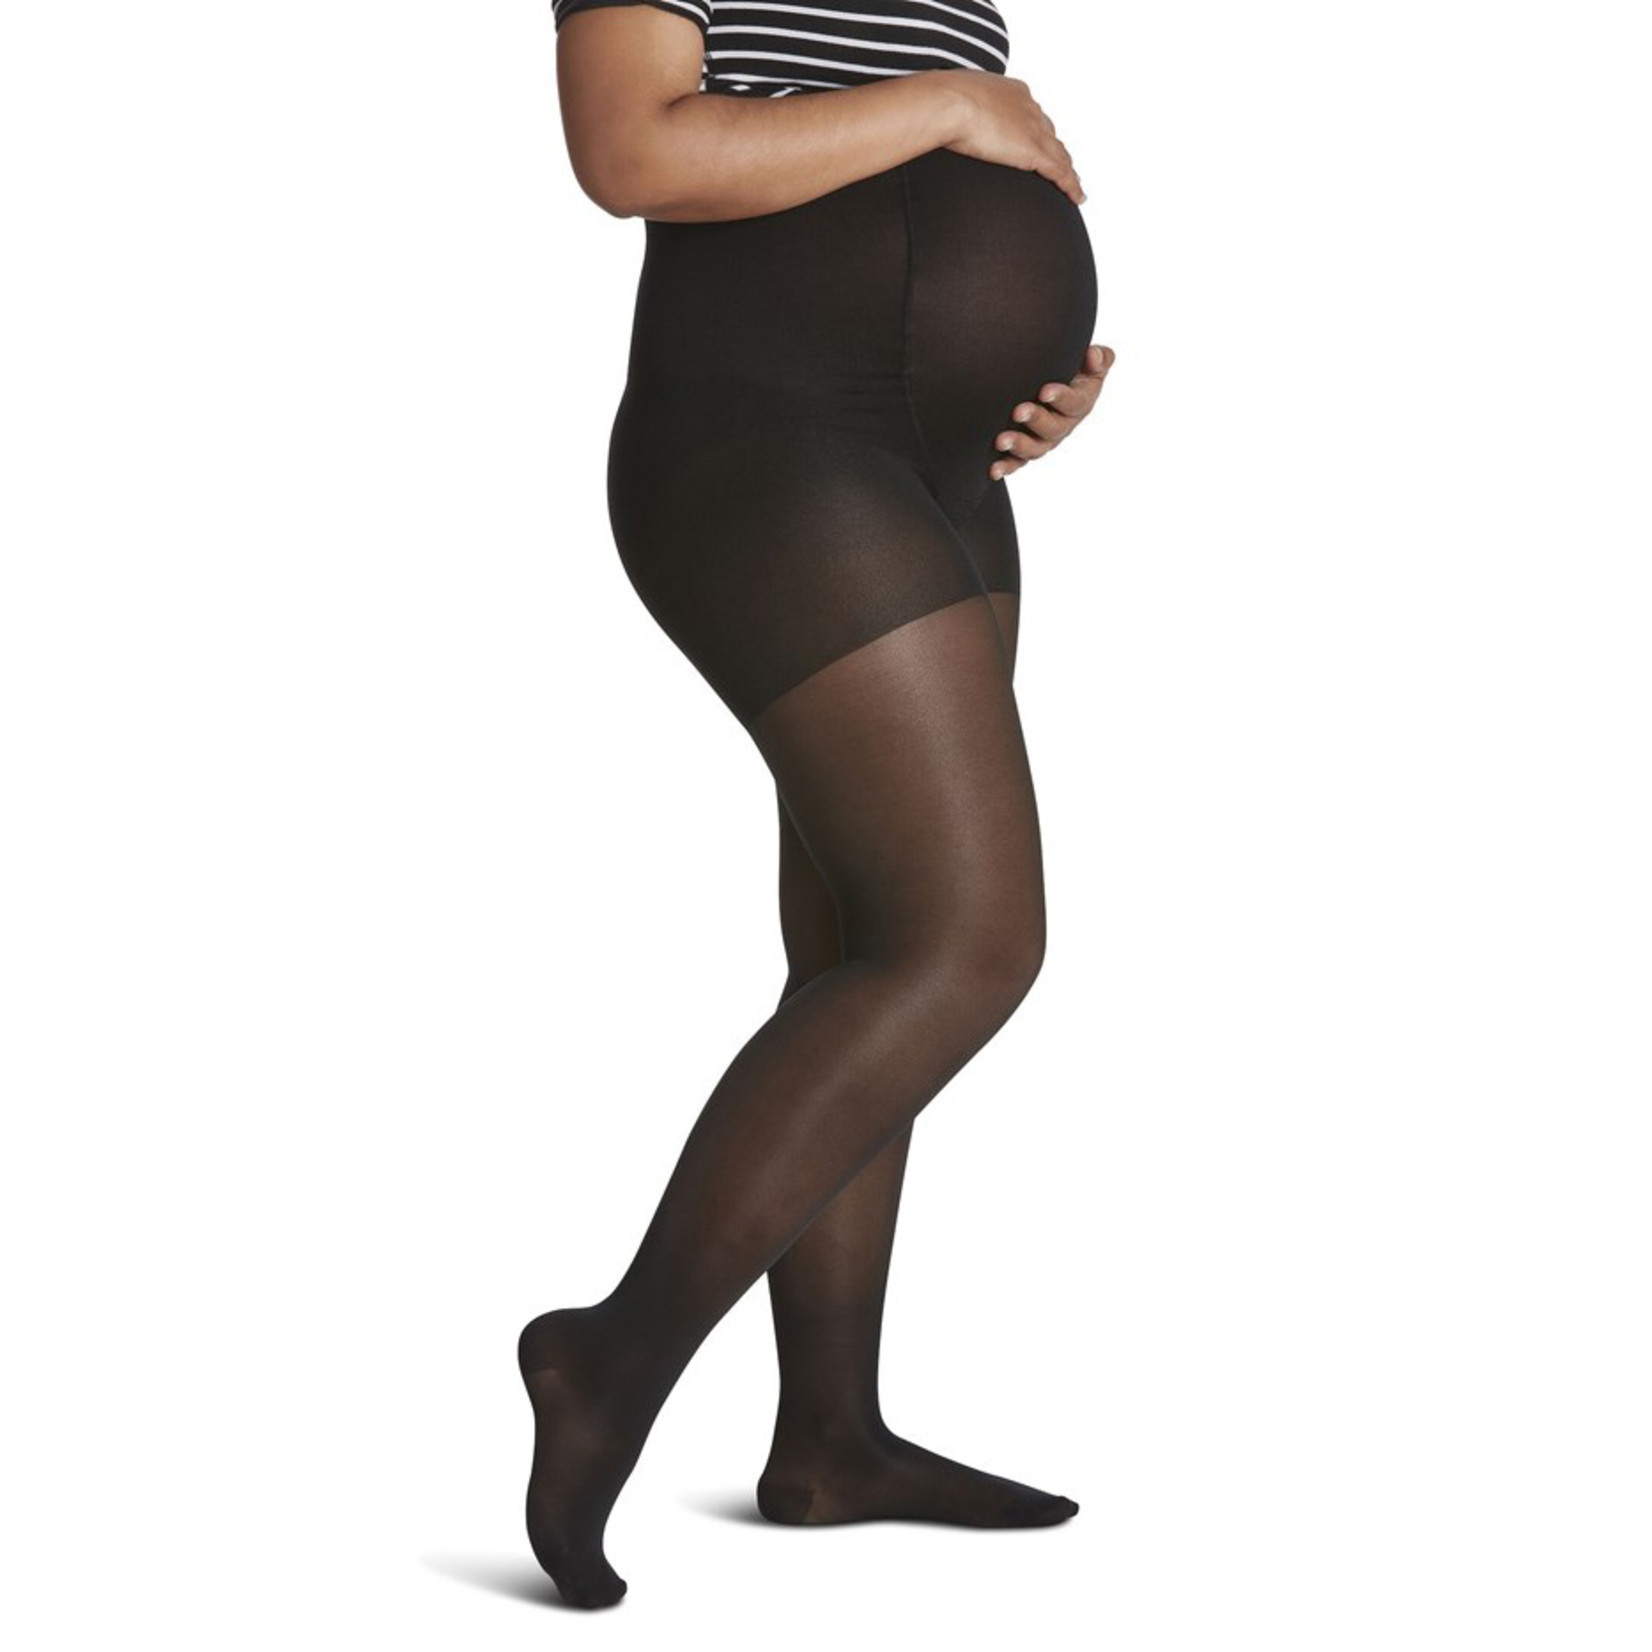 Sigvaris Women Sheer Maternity Pantyhose Compression Hosiery